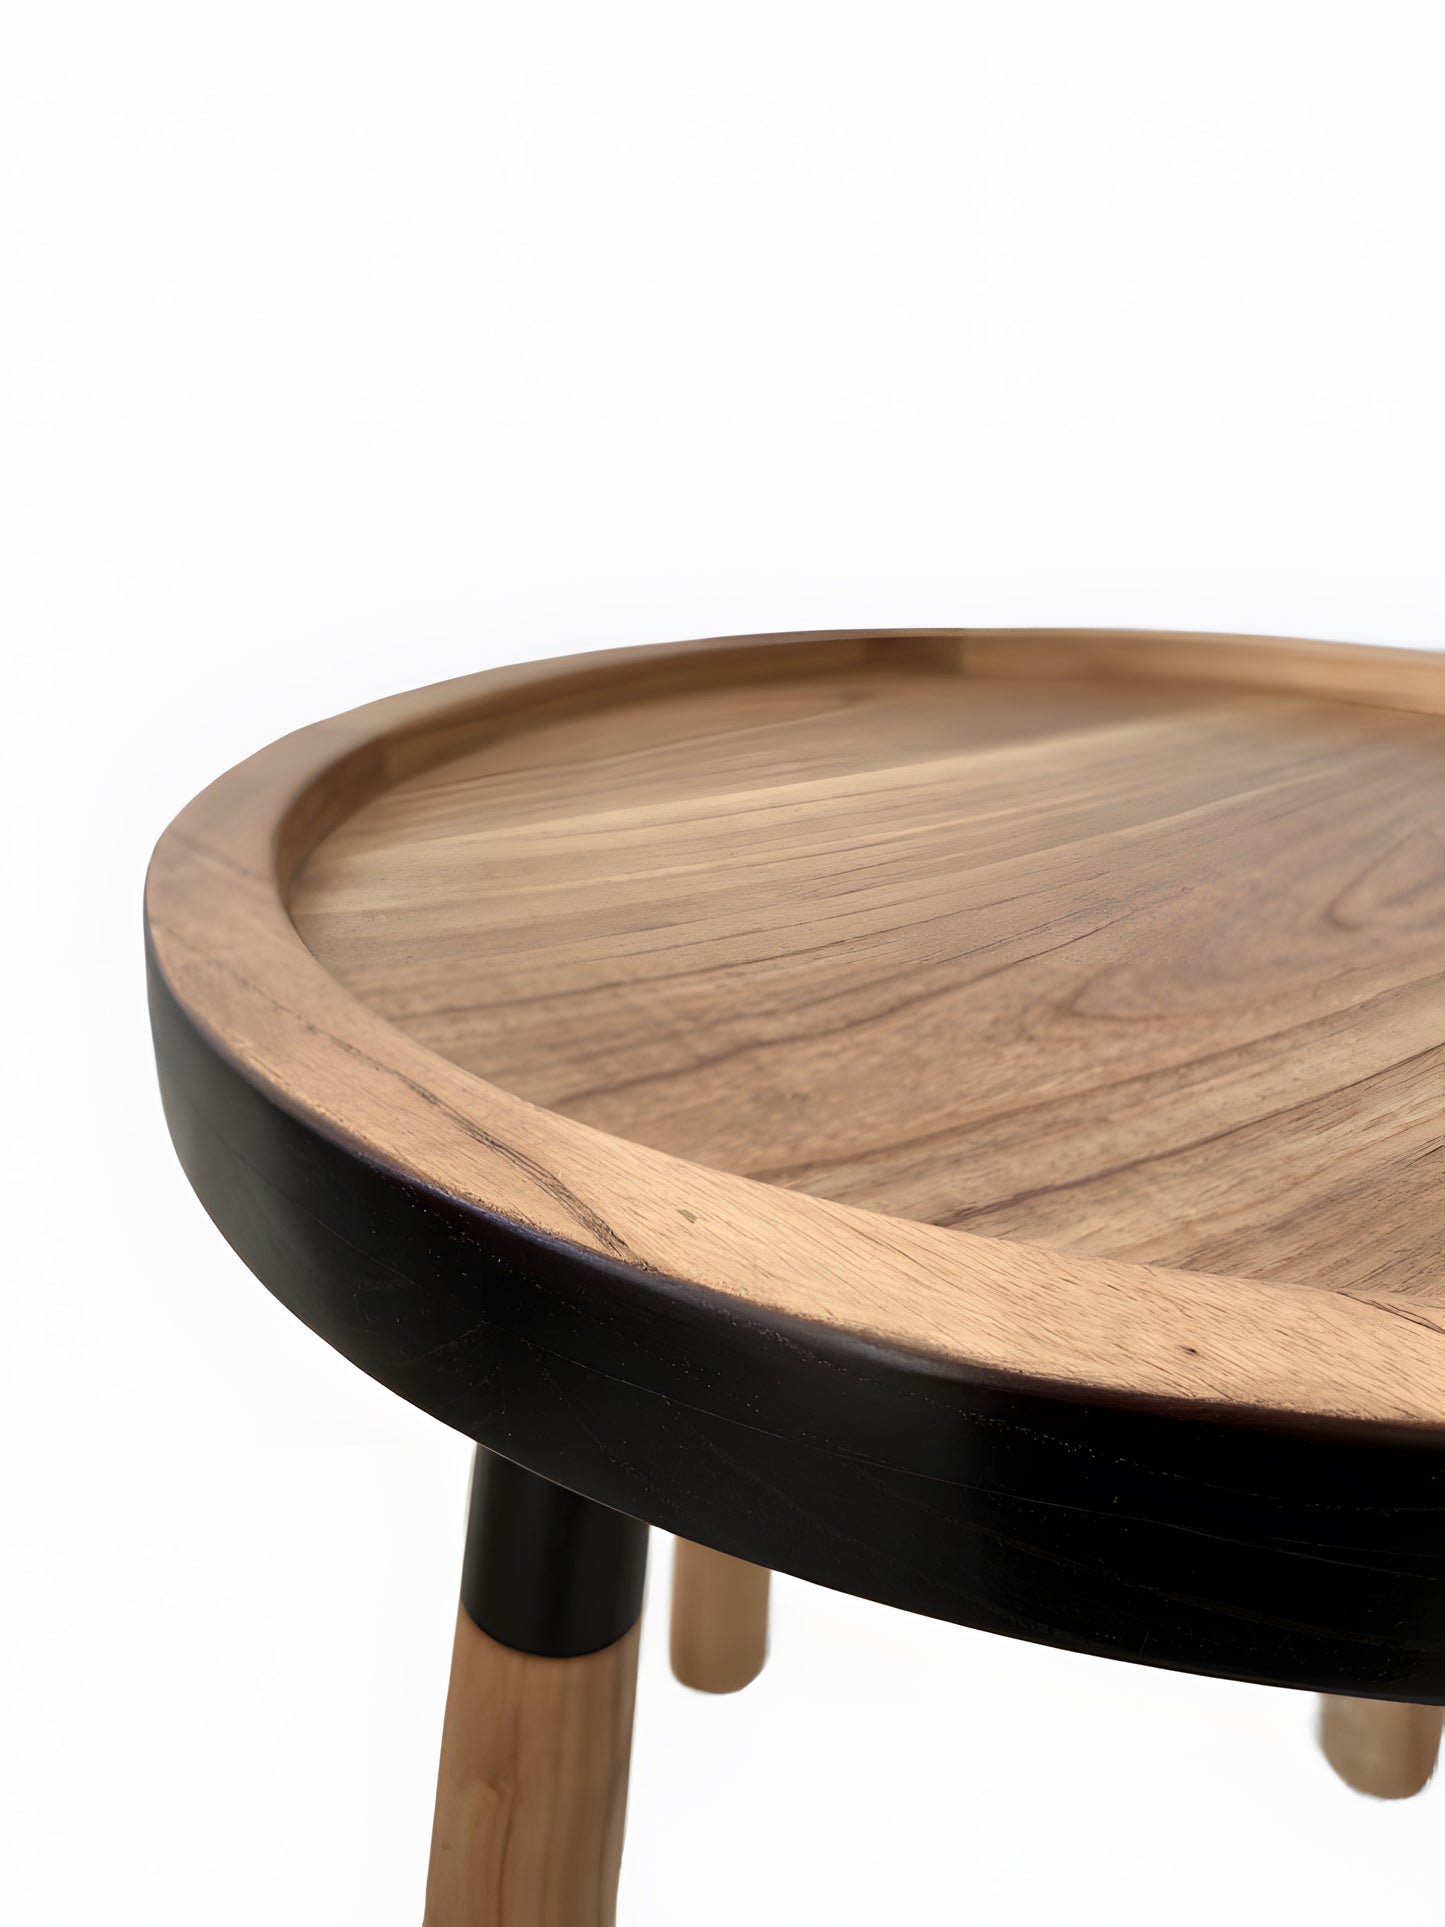 Tomasa Teakwood Tray Top Round Coffee Table detail view by Mellowdays Furniture